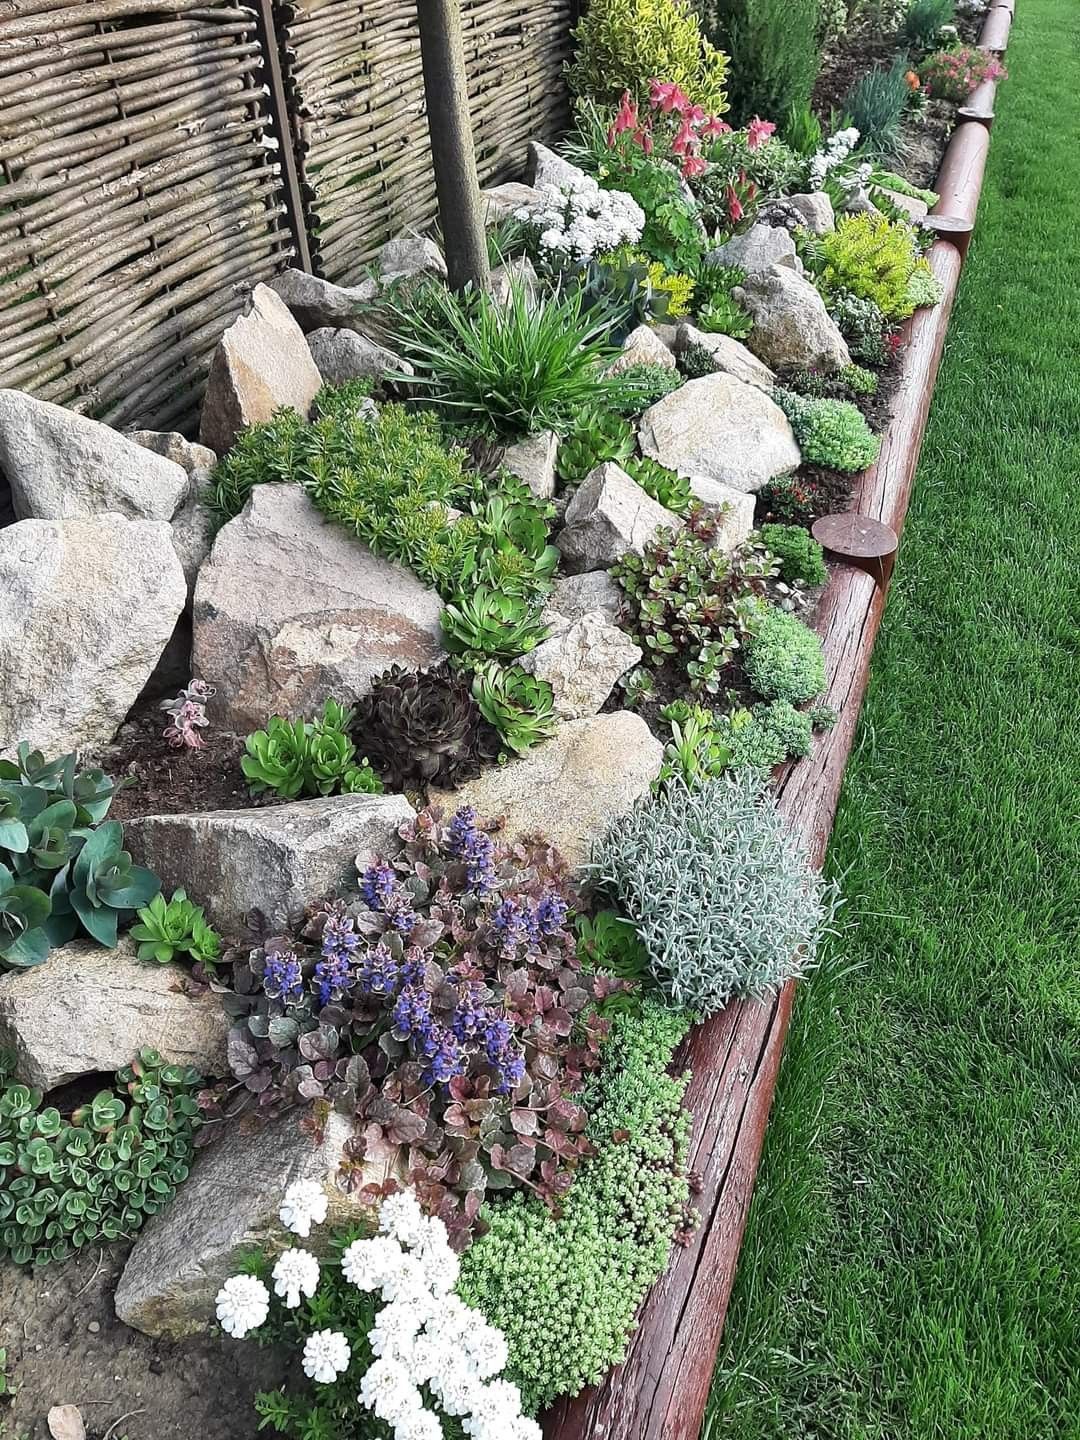 Creating Charming Flower Beds with Rocks